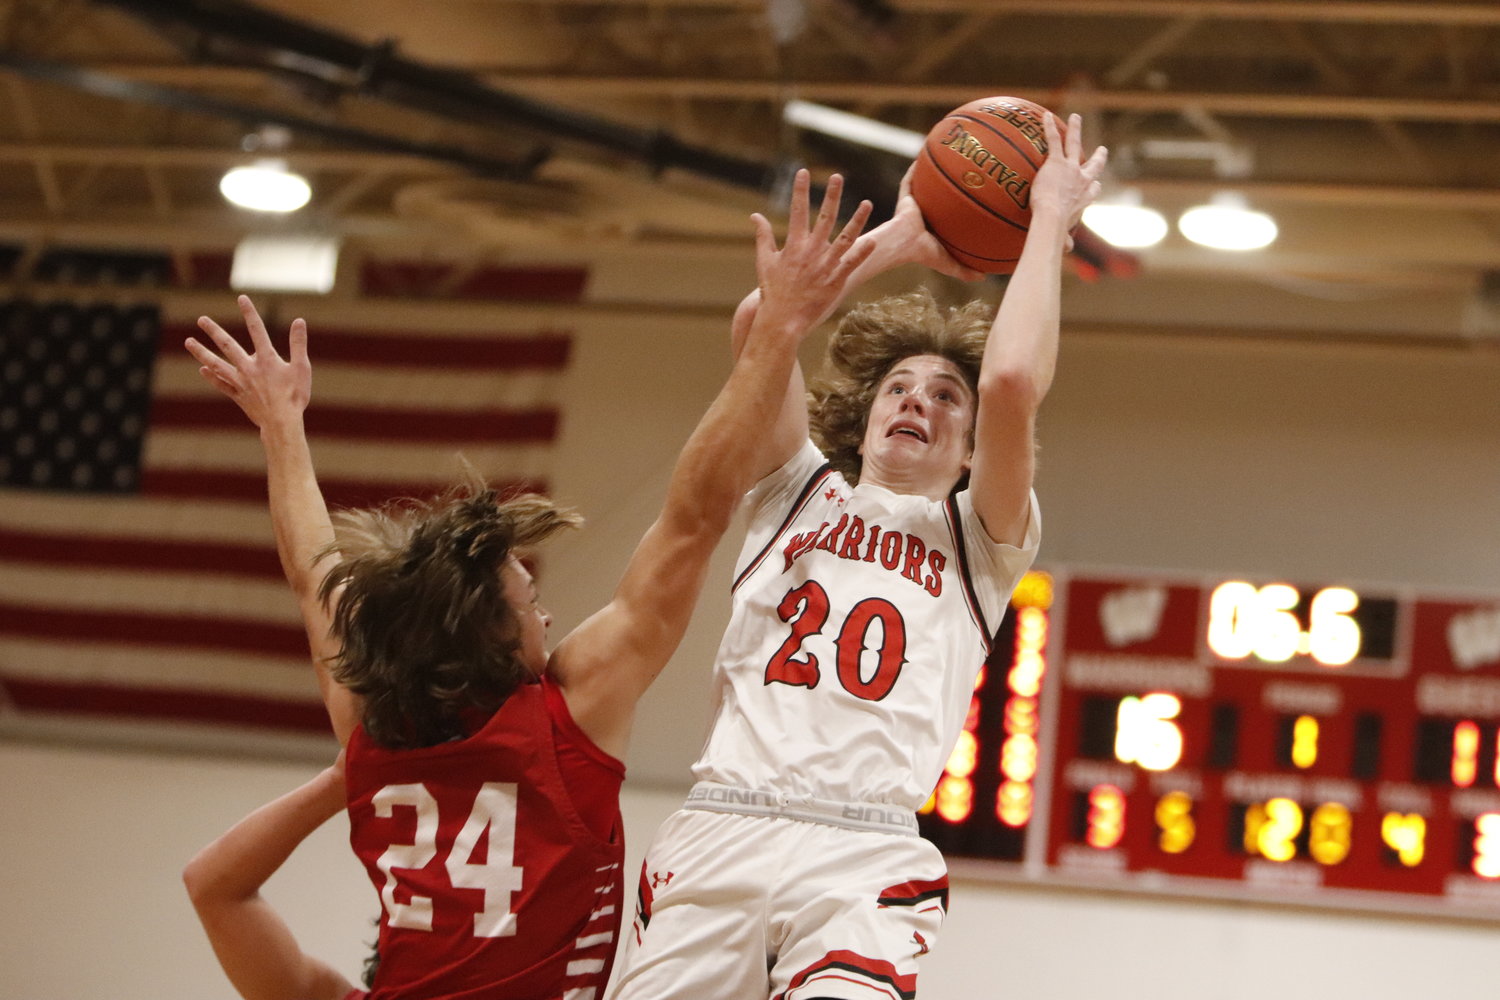 Troy Anderson goes up for a shot in a game against St. Clair earlier this season.